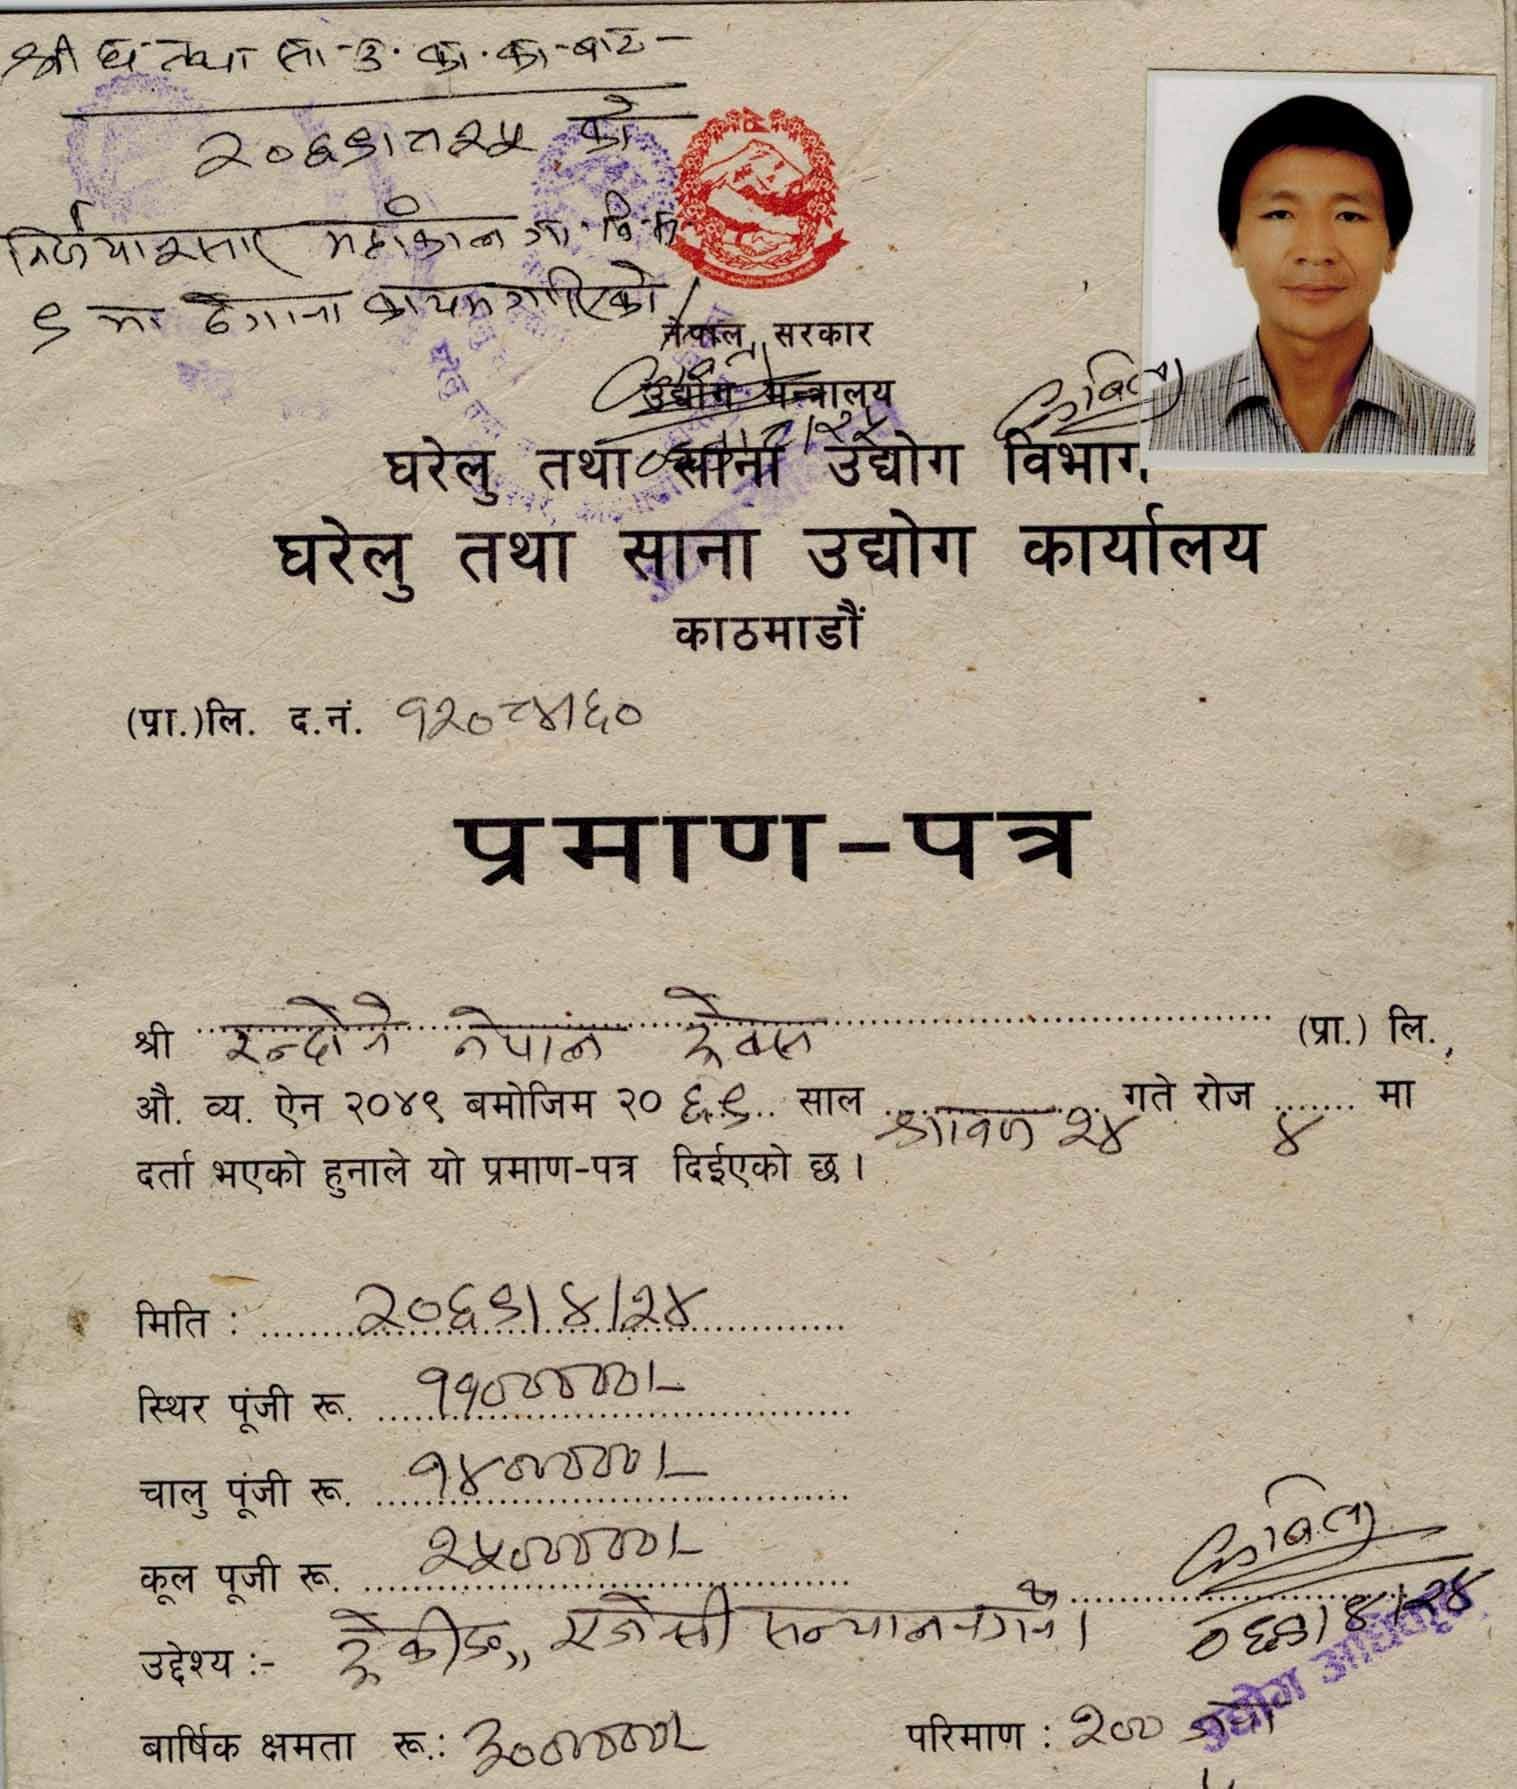 Certificate of Cottage and Small Scale Industries